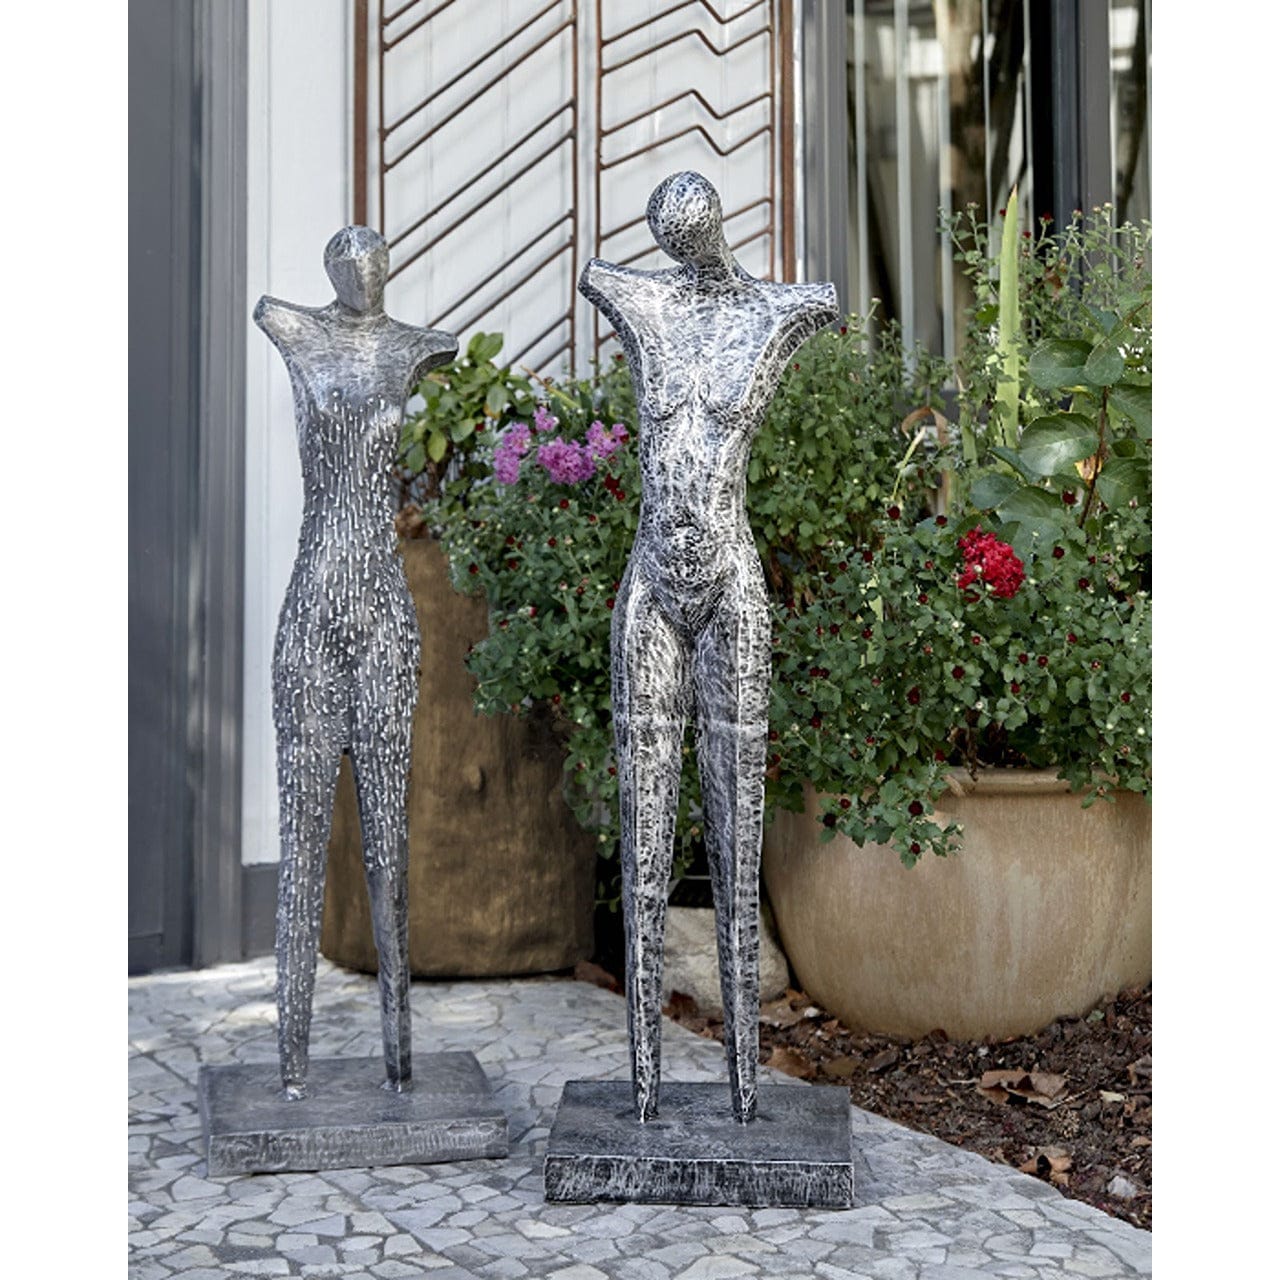 Abstract Female Silver Sculpture